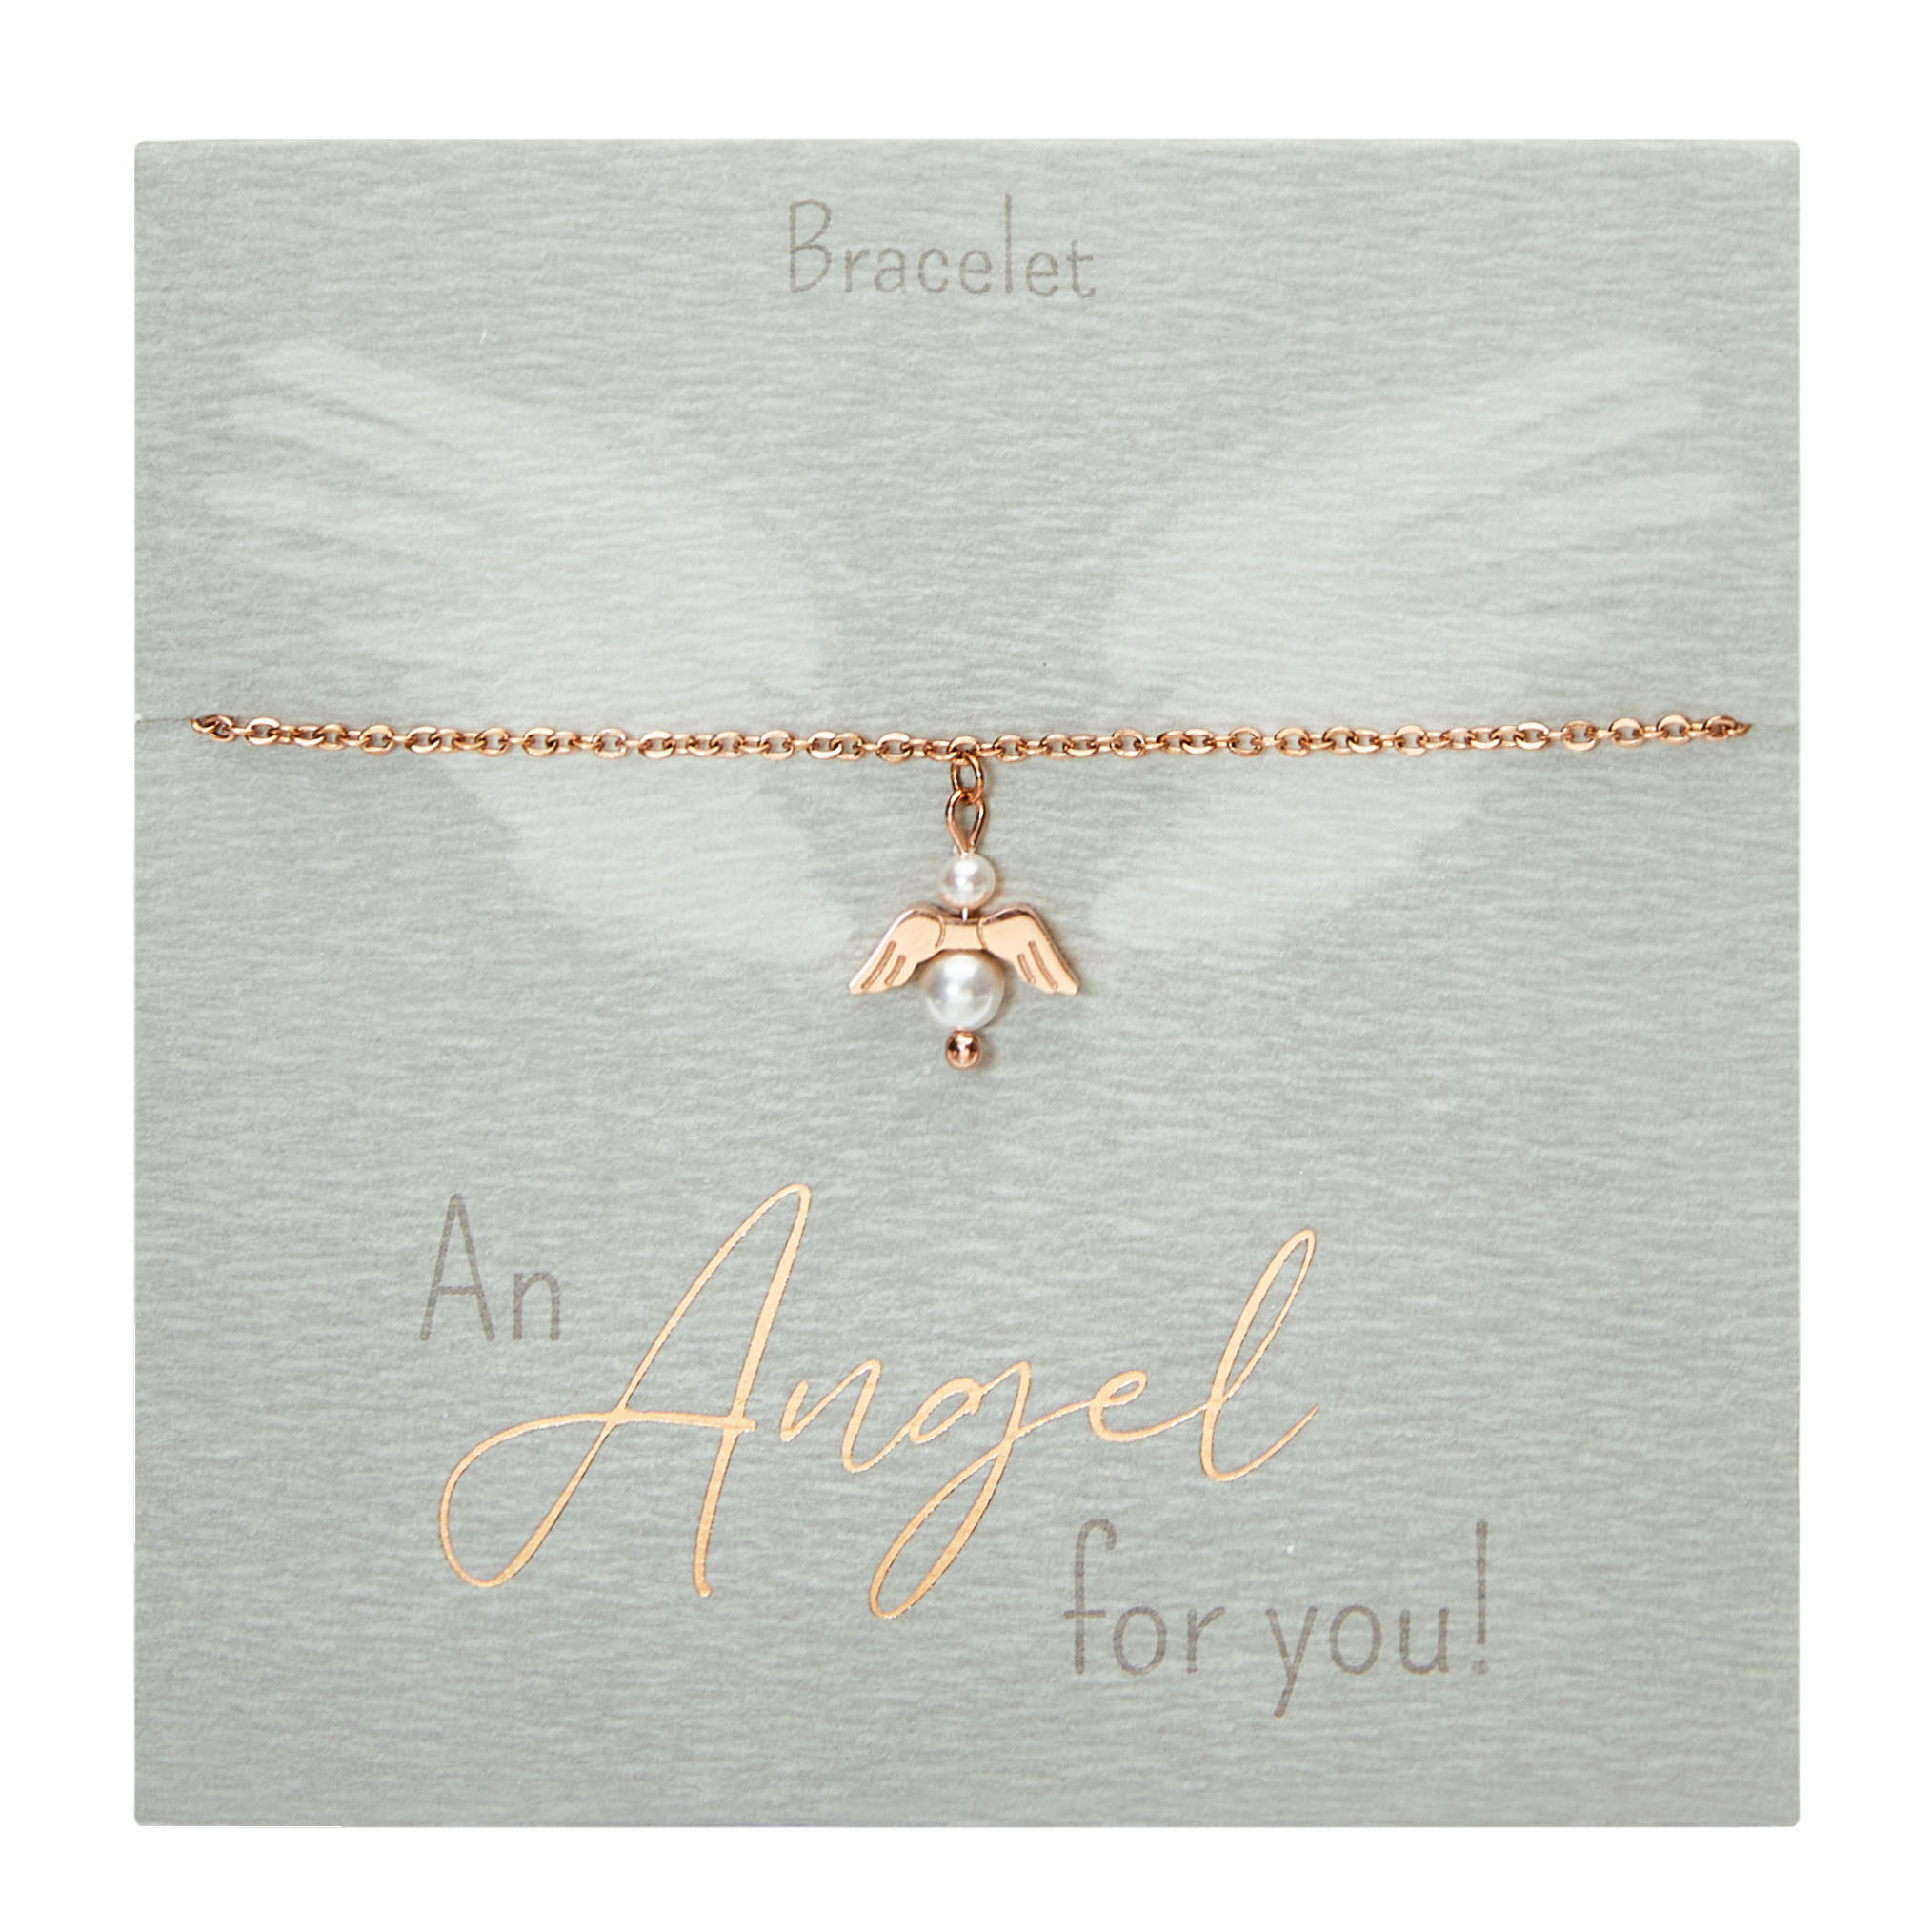 Display  Armbänder "An Angel for you"